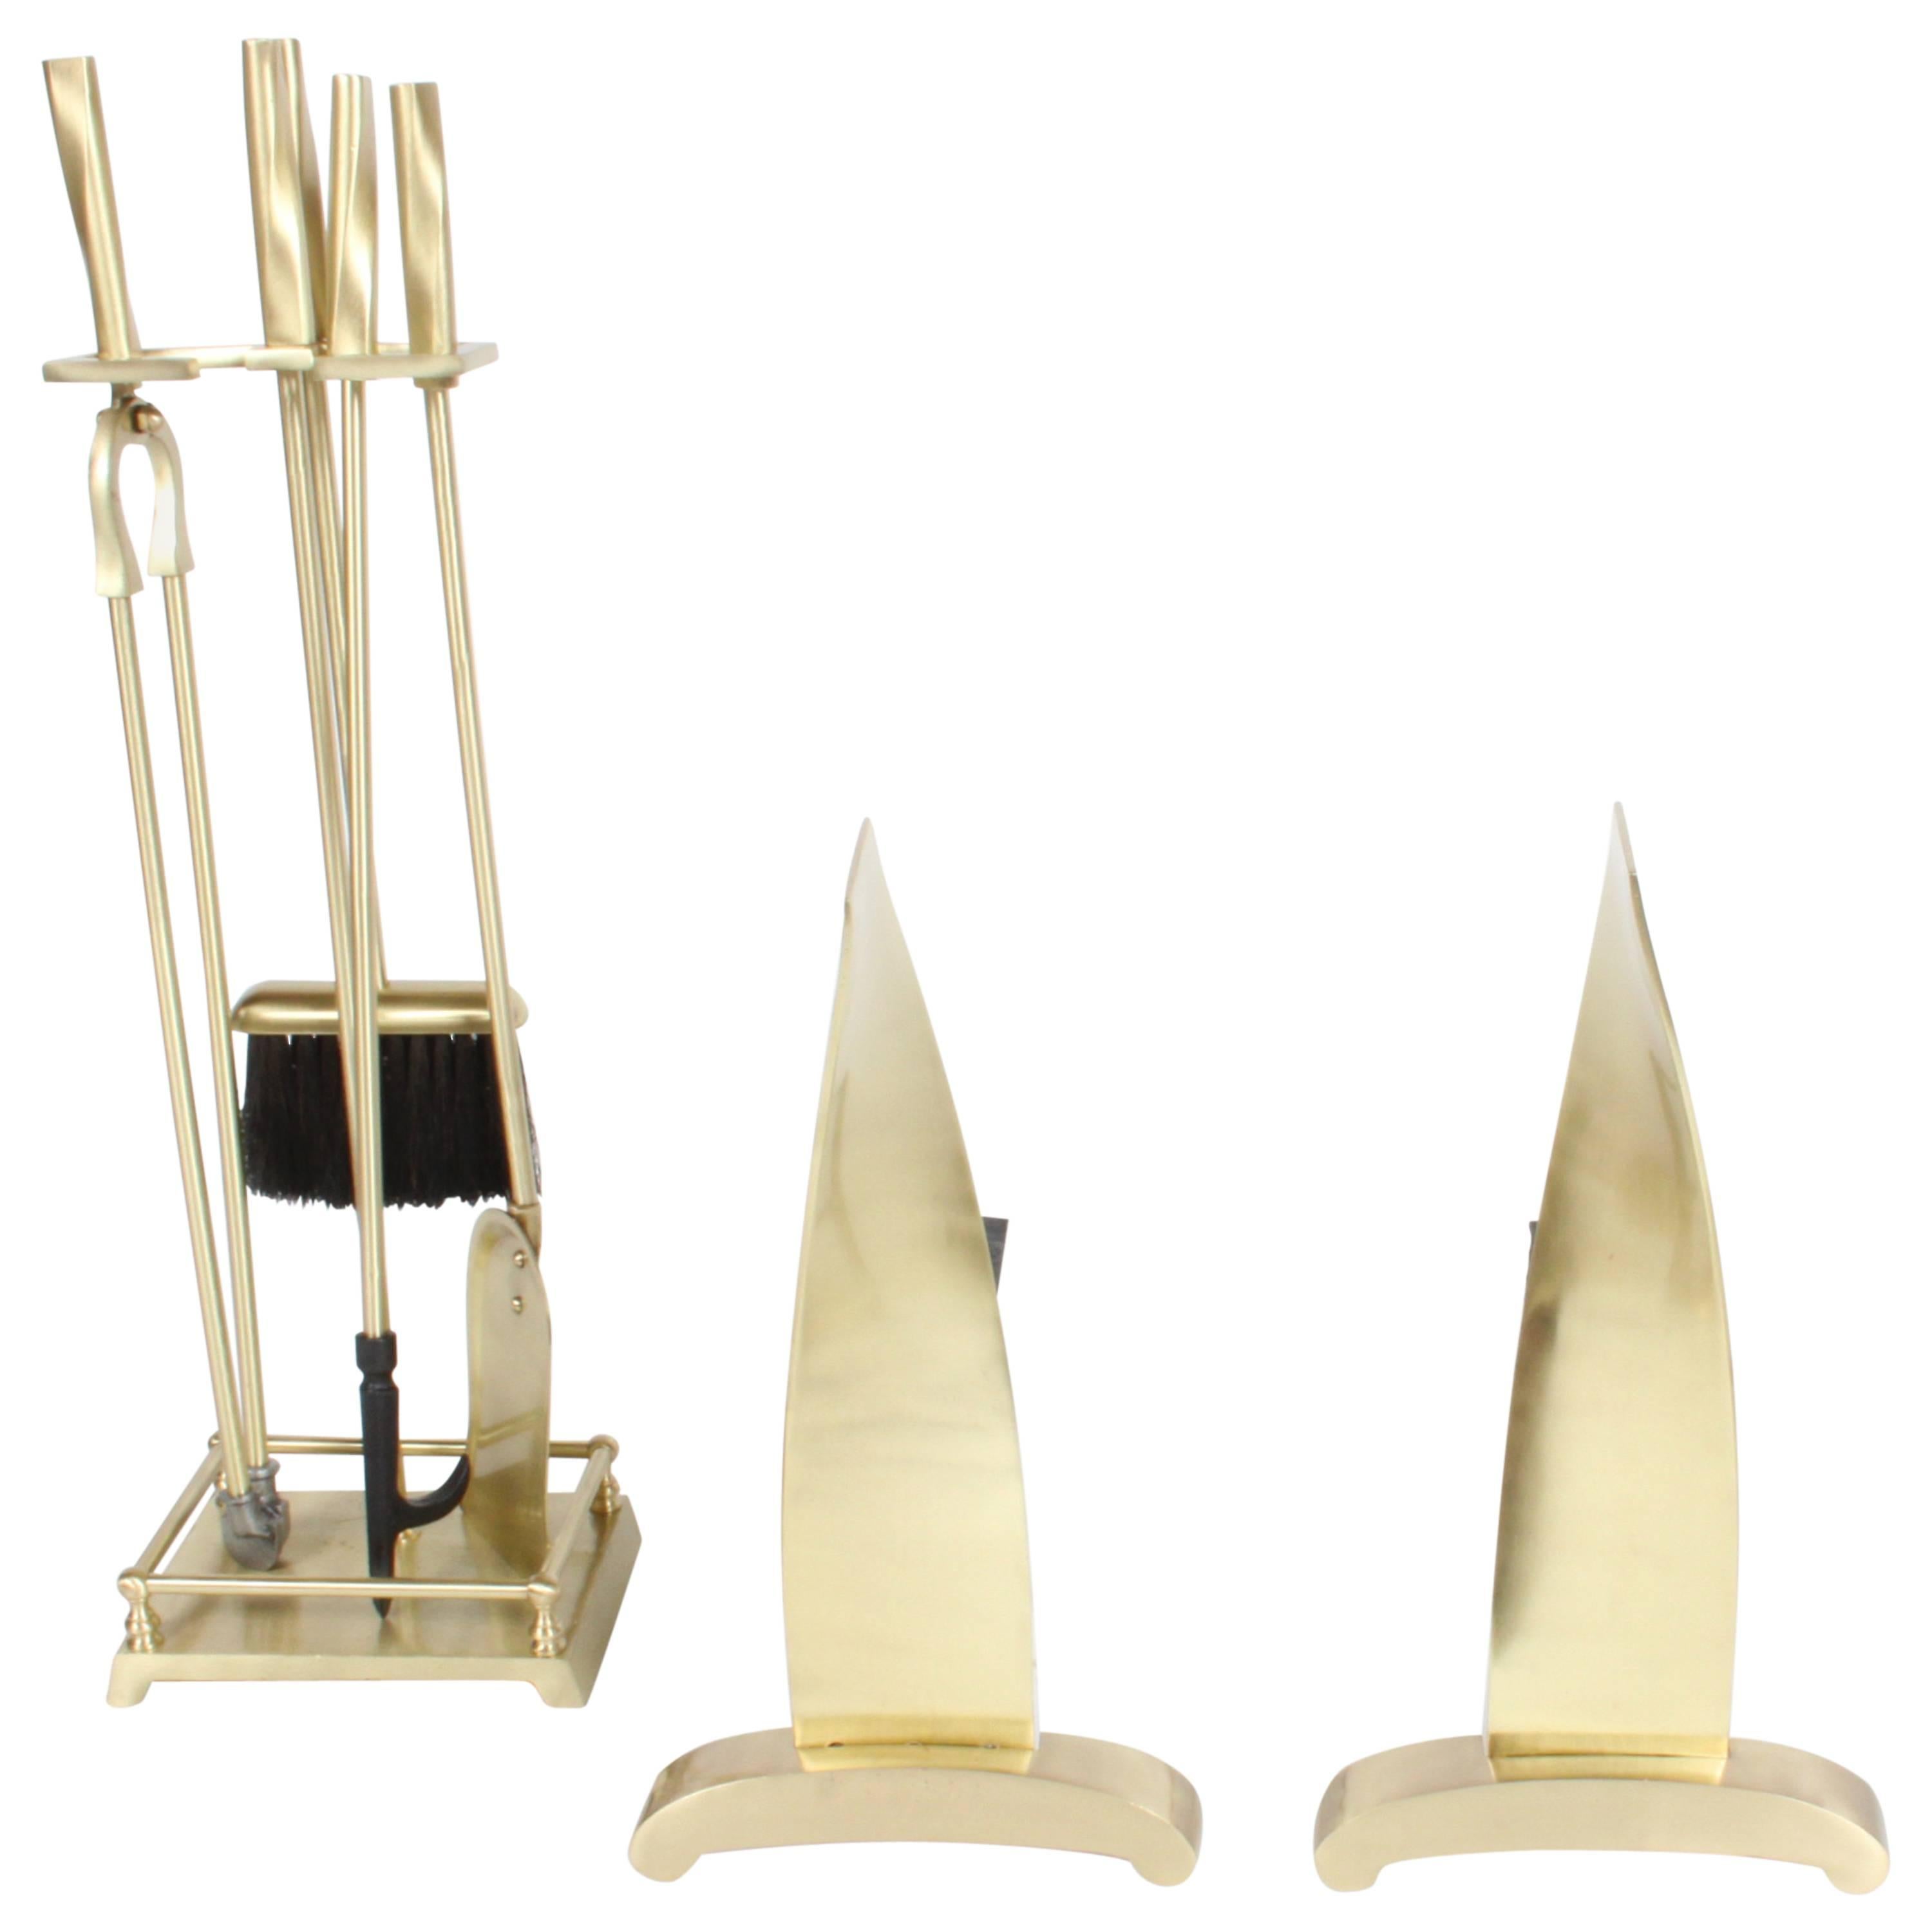 Brass Art Deco Modern torqued Andirons and Fire Tools Set, Deskey Style